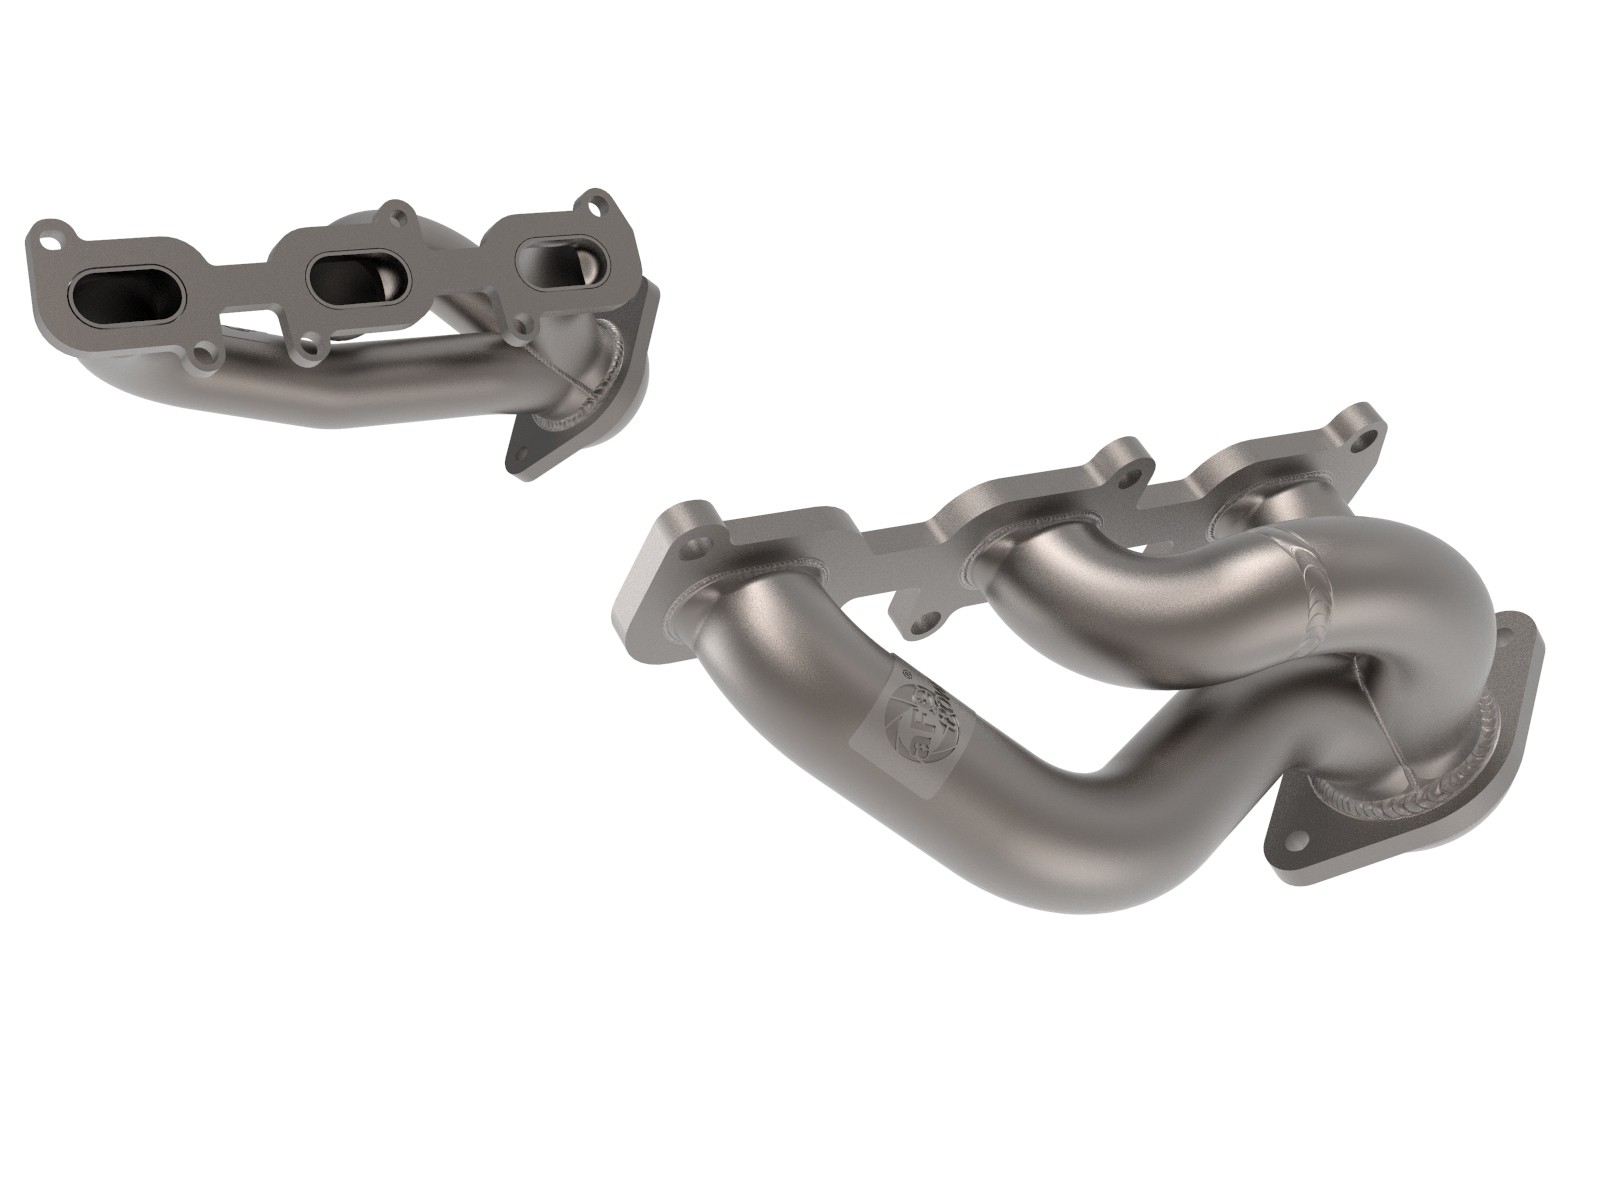 Ford Mustang 2011-2017 V6 3.7L  Twisted Steel 409 Stainless Shorty Header, w/ Titanium Ceramic Coat Finish